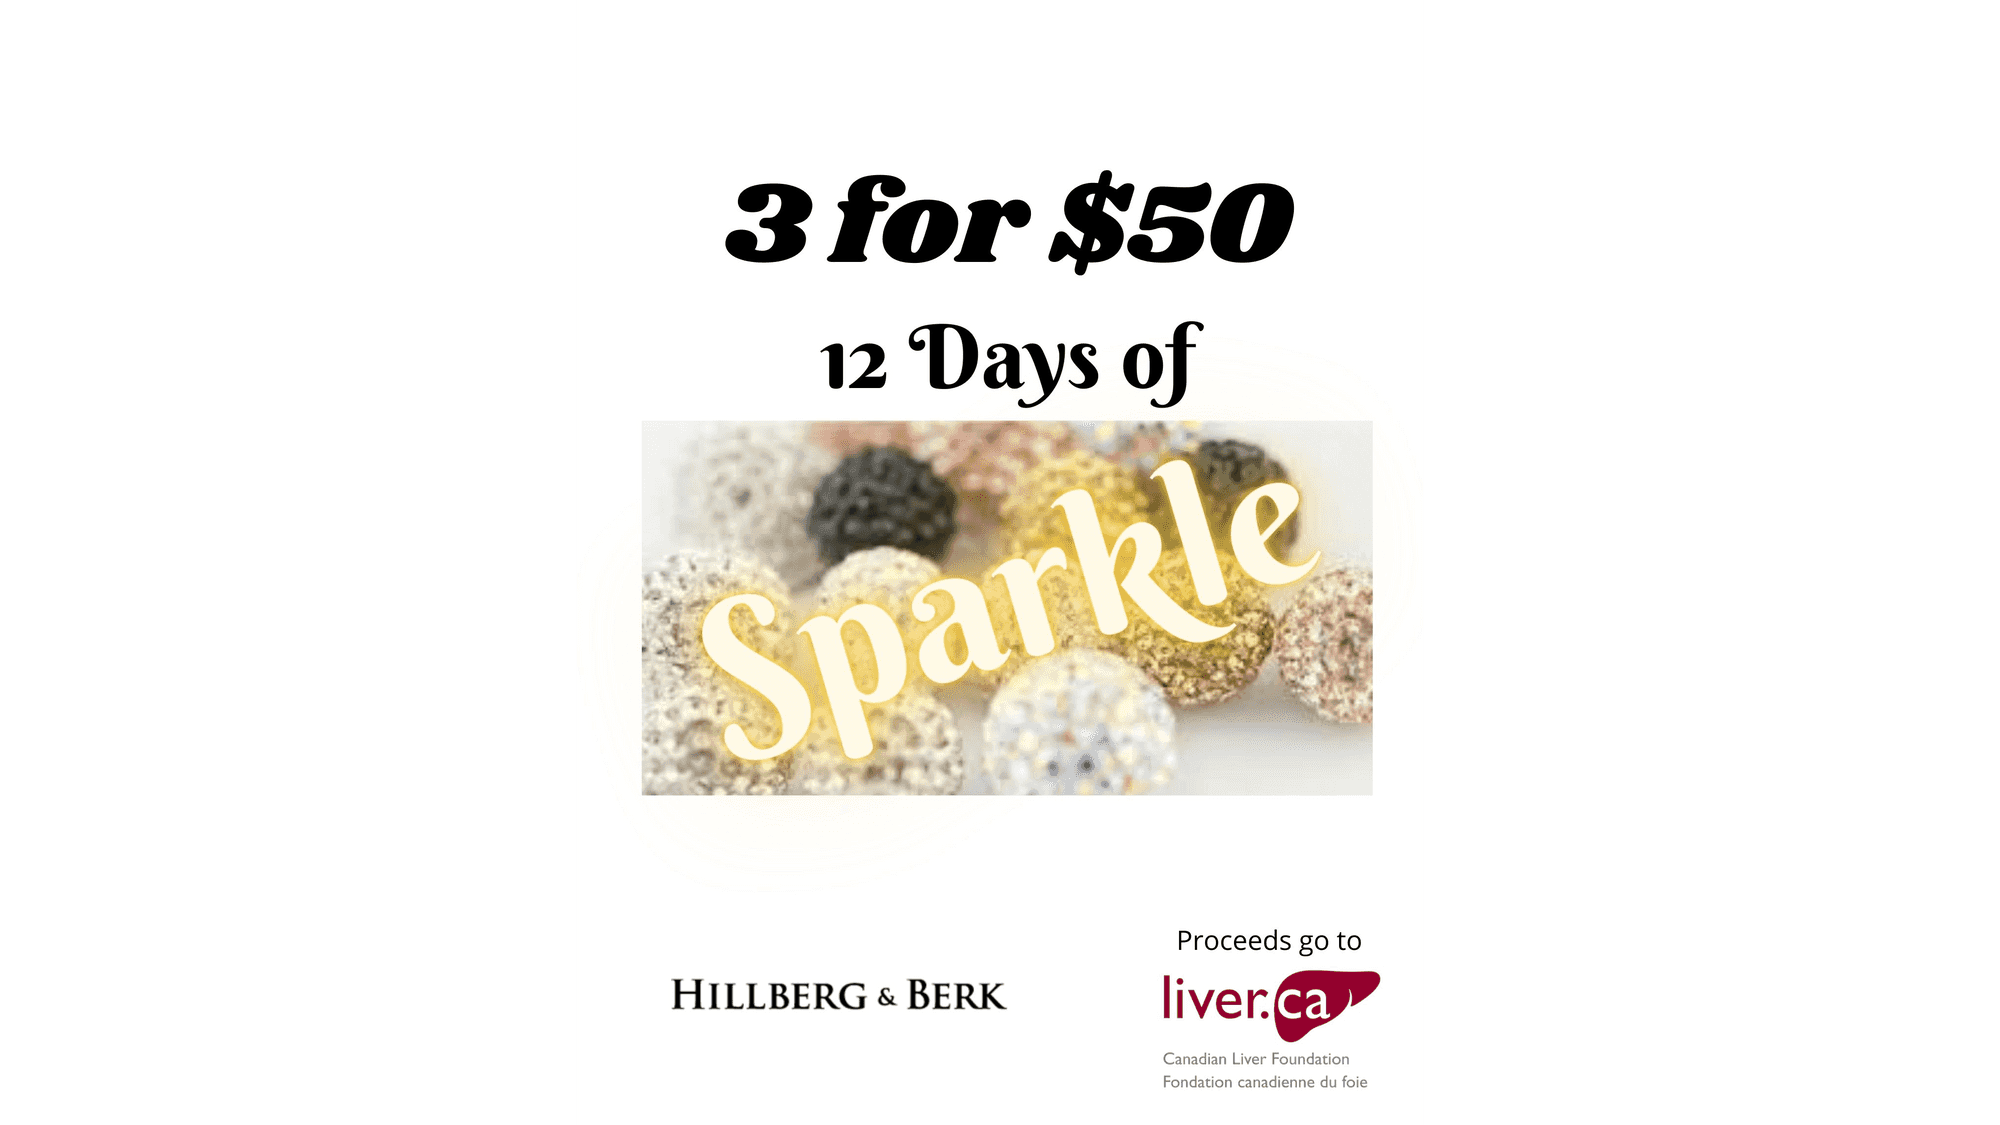 12 Days of Sparkle Raffle- 3 for $50